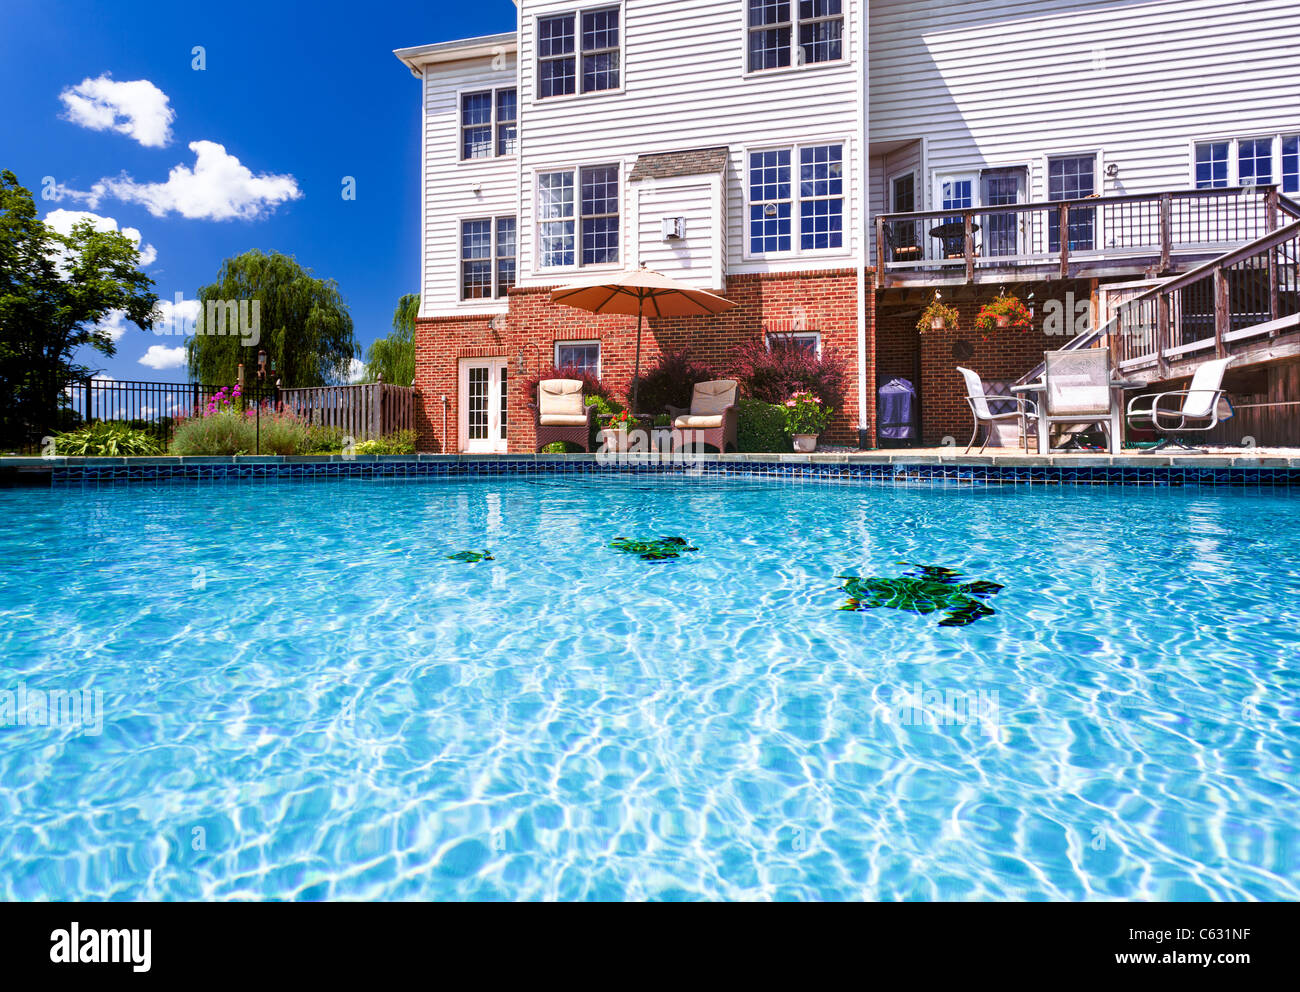 Swimming pool in the backyard garden of a large detached house Stock Photo